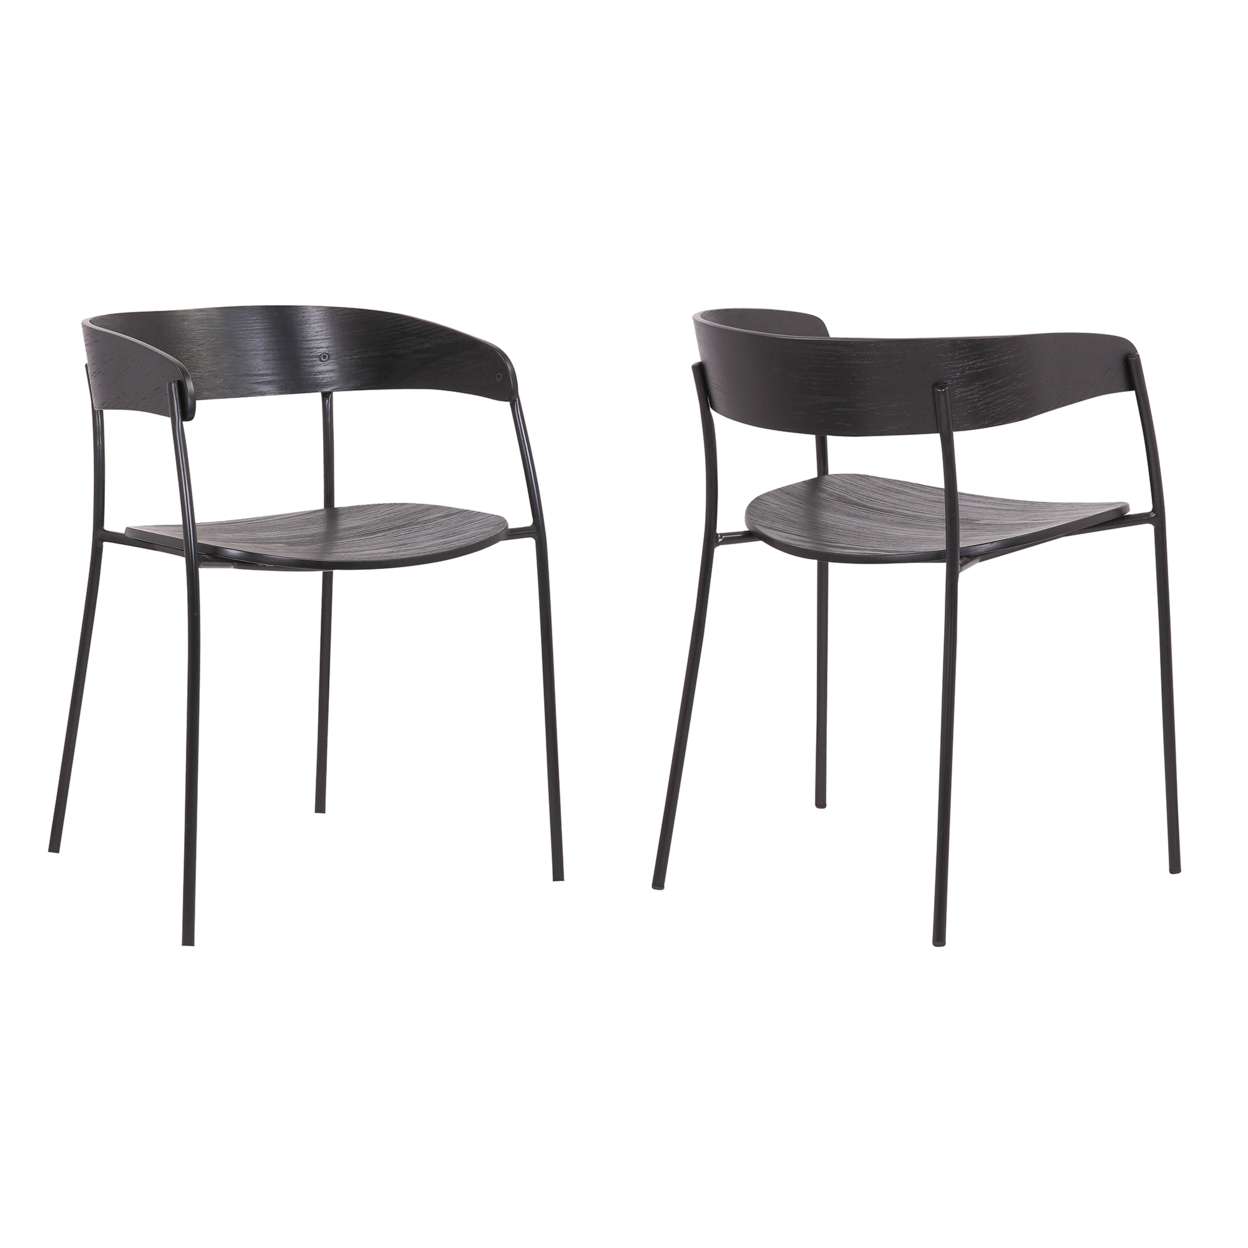 18.5 Inches Round Back Wooden Seat Dining Chair, Set Of 2, Black- Saltoro Sherpi